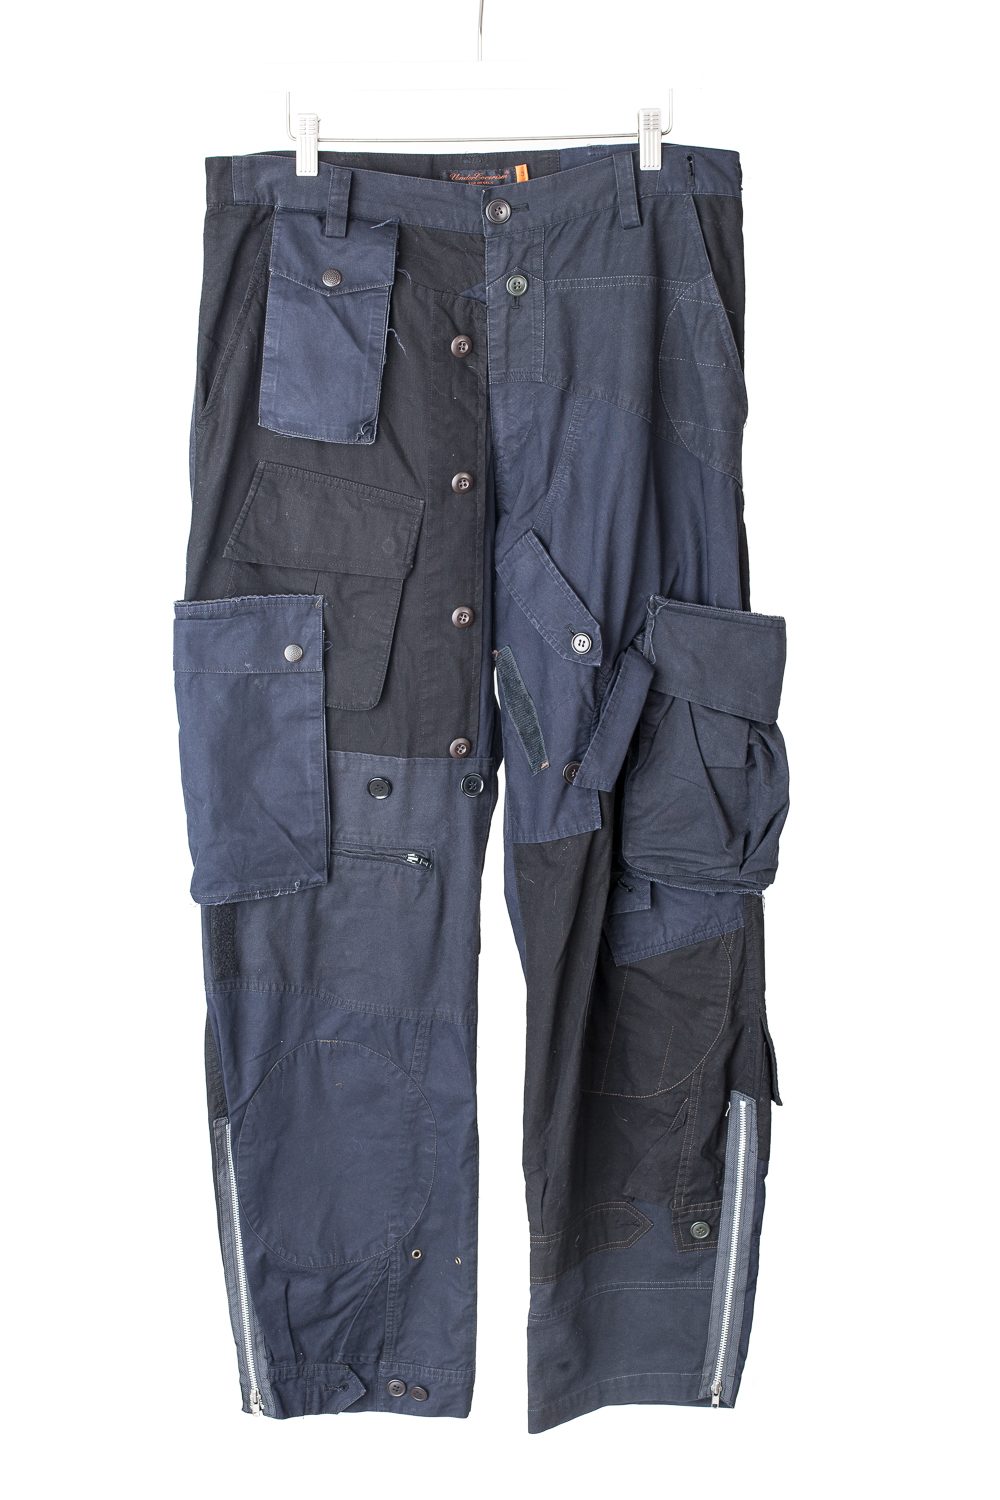 SS05 “But Beautiful II” Reconstructed Military Pants